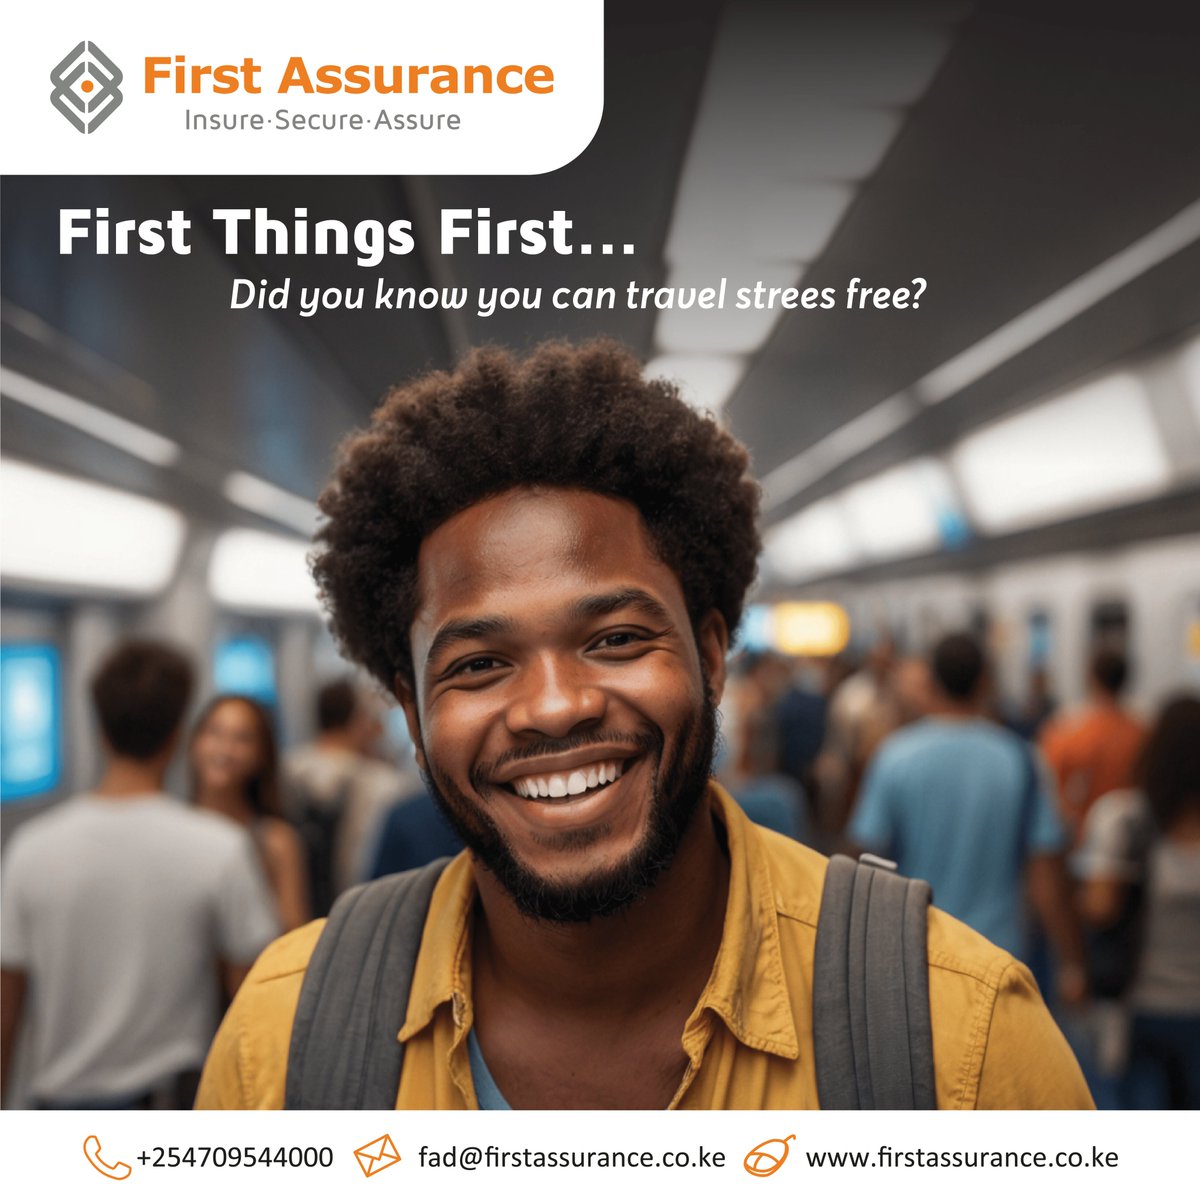 Happy #NationalTravelInsuranceClaimsDay! Travel with peace of mind knowing travel insurance can turn disasters into minor inconveniences. Explore: firstassurance.co.ke/travel-insuran…
& travel safely or reach out to our customer service team at 0709544 000.
#FirstThingsFirst #FirstAssurance